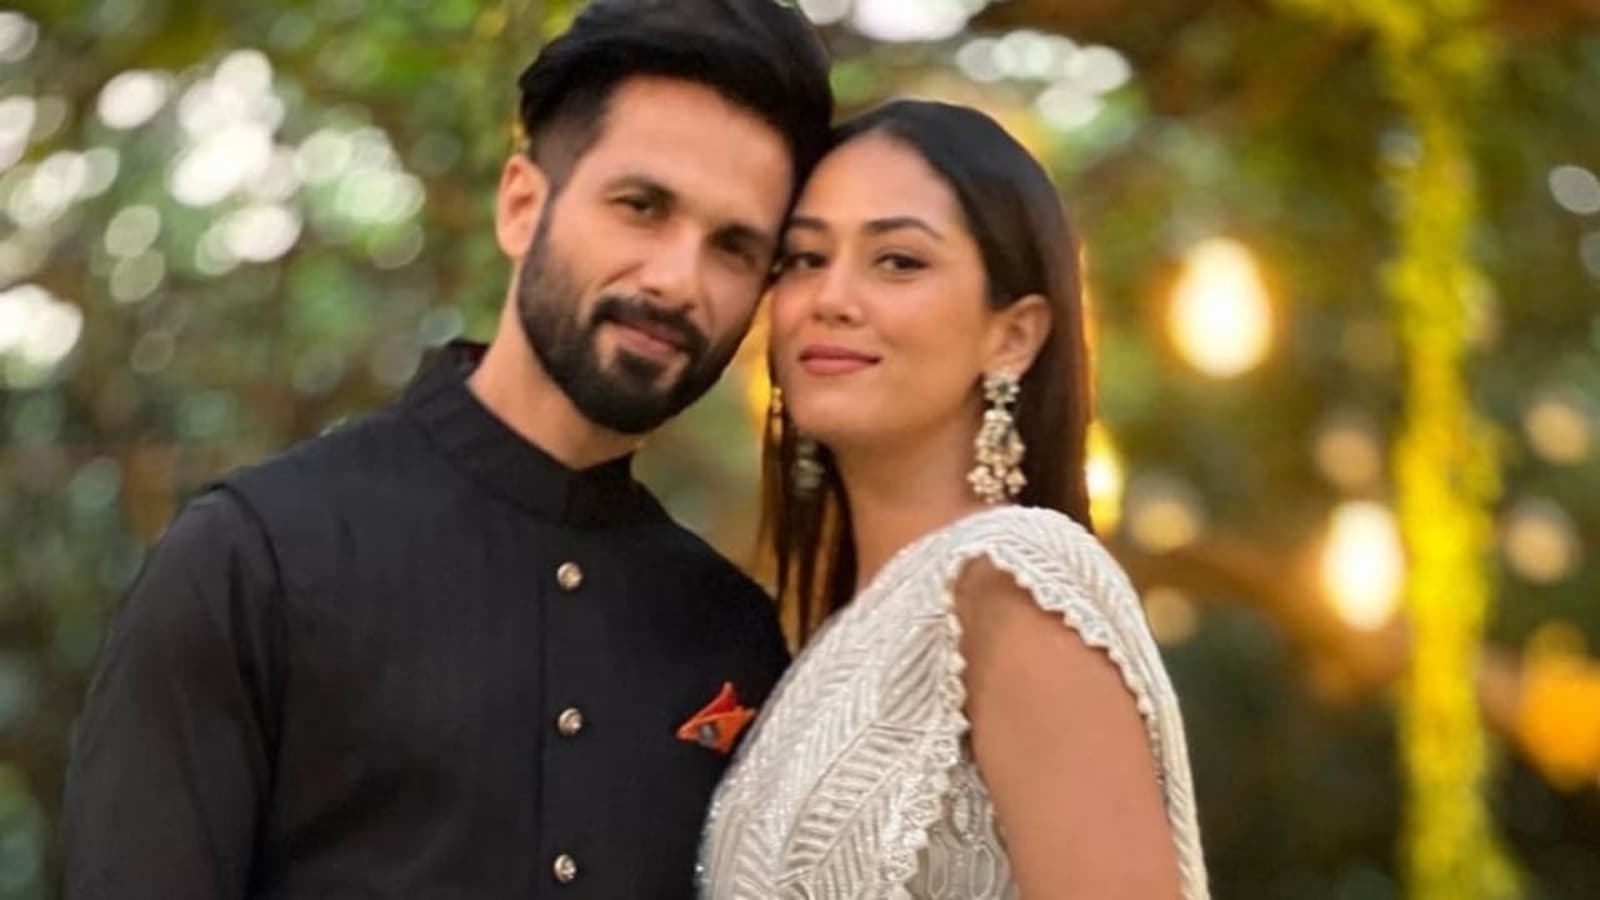 Shahid Kapoor, Mira Rajput unable to find ‘veg food’ in Sicily; she calls hotel ‘insensitive to dietary requirements’